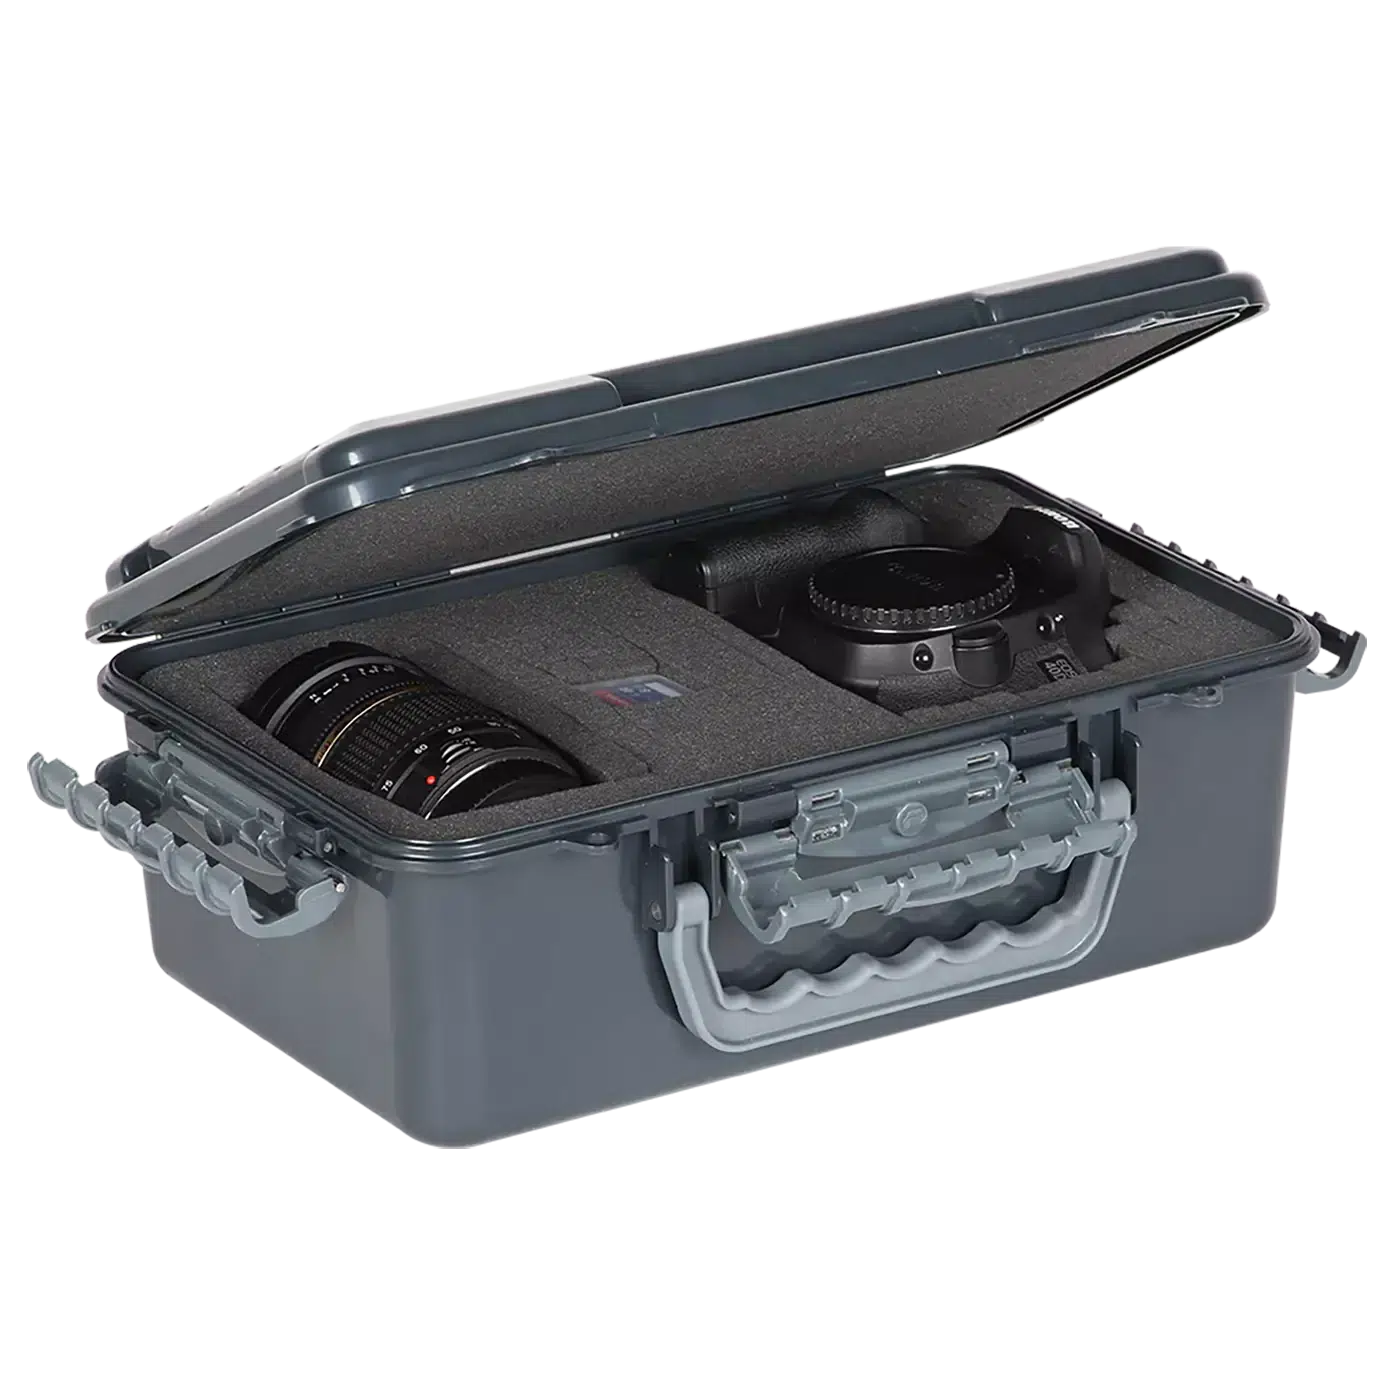 Plano ABS Guide Series Waterproof Case-Tackle Boxes & Bags-Plano-Extra Large Black 147080 (Clearance)-Fishing Station